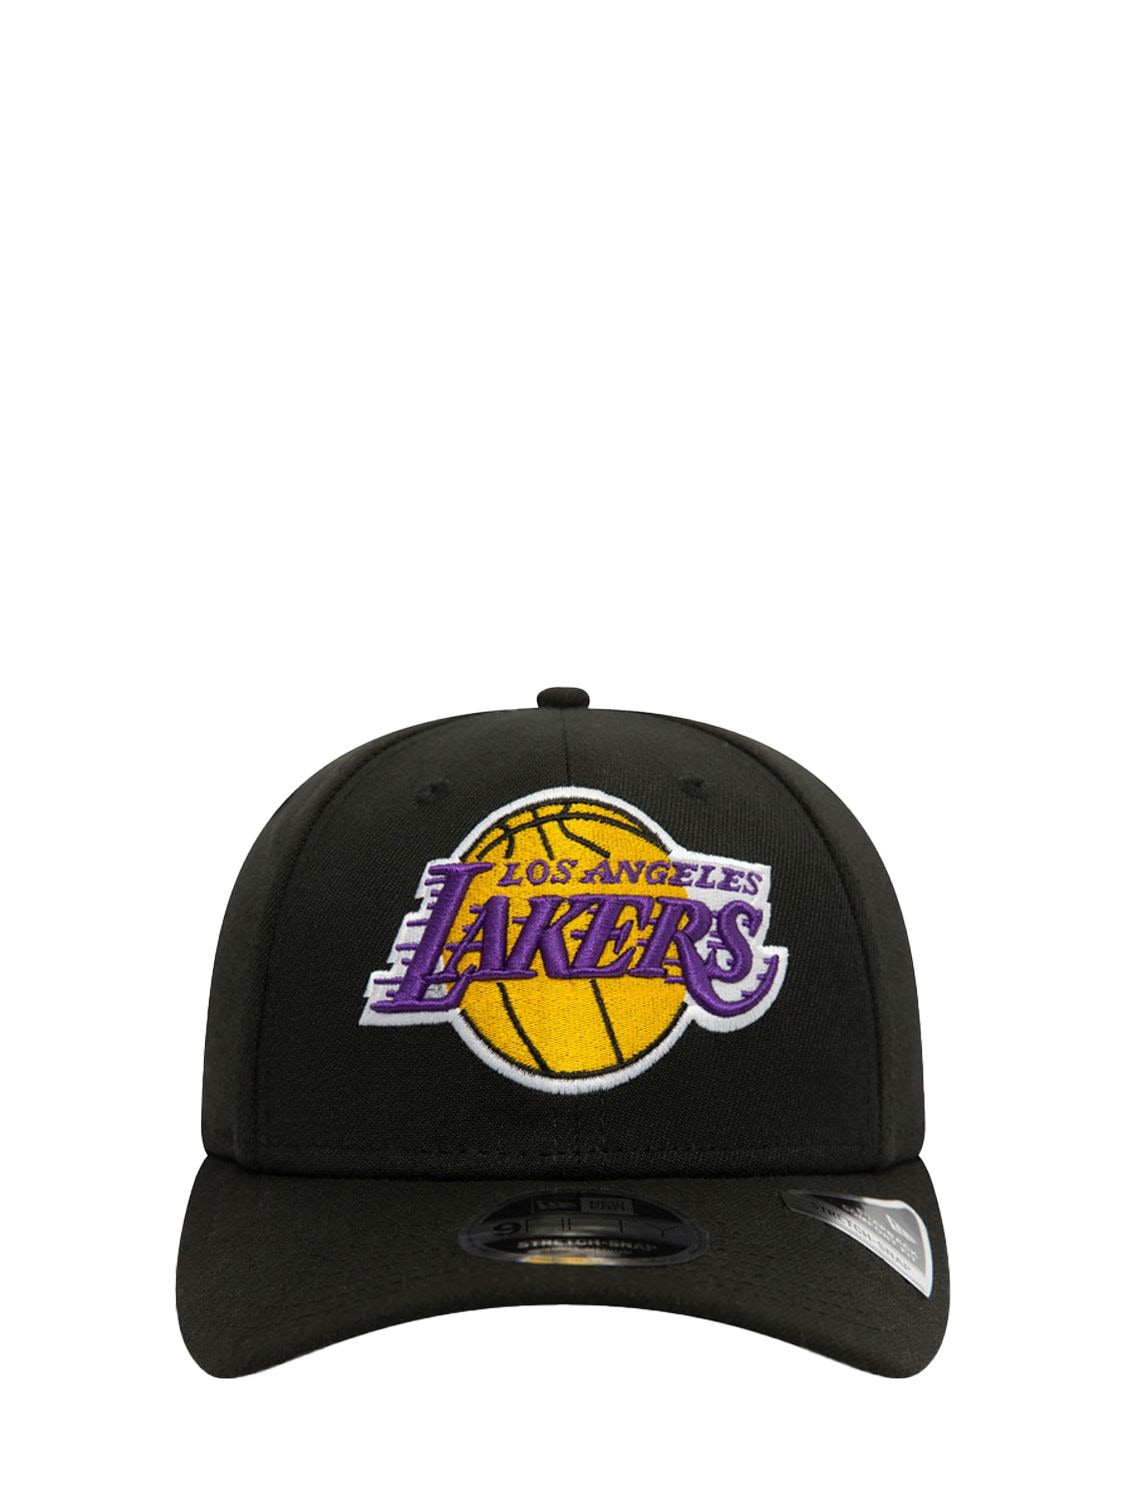 New Era 9fifty Stretch Snap La Lakers Hat In Black